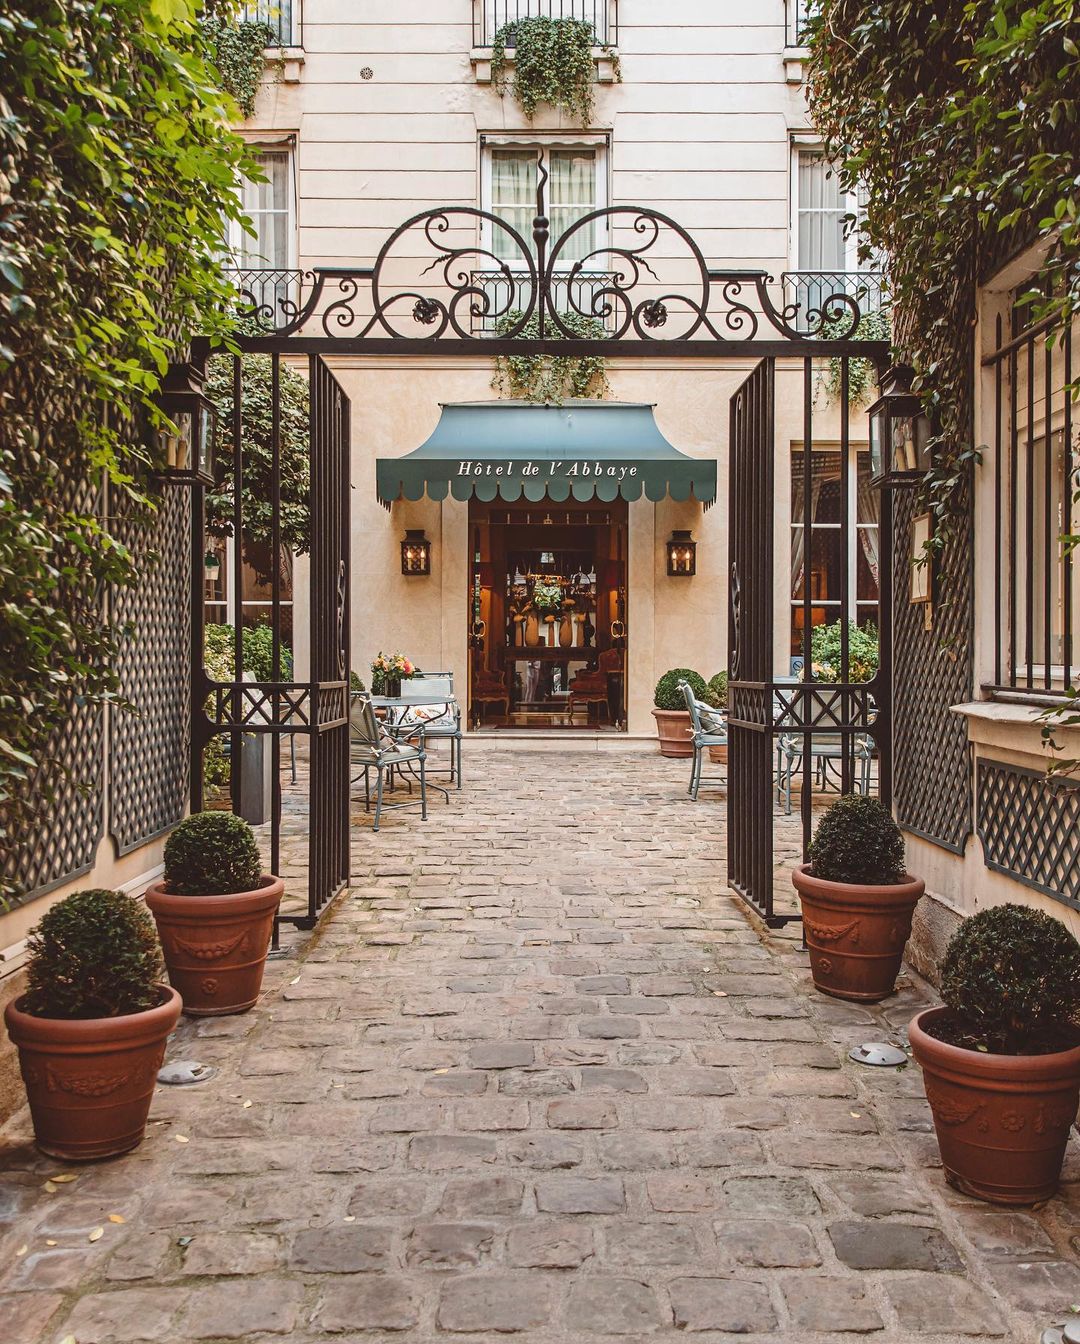 The hidden entrance to Hôtel de l'Abbaye in Paris with its metal green awning, original cobblestone courtyard and ornate iron gate